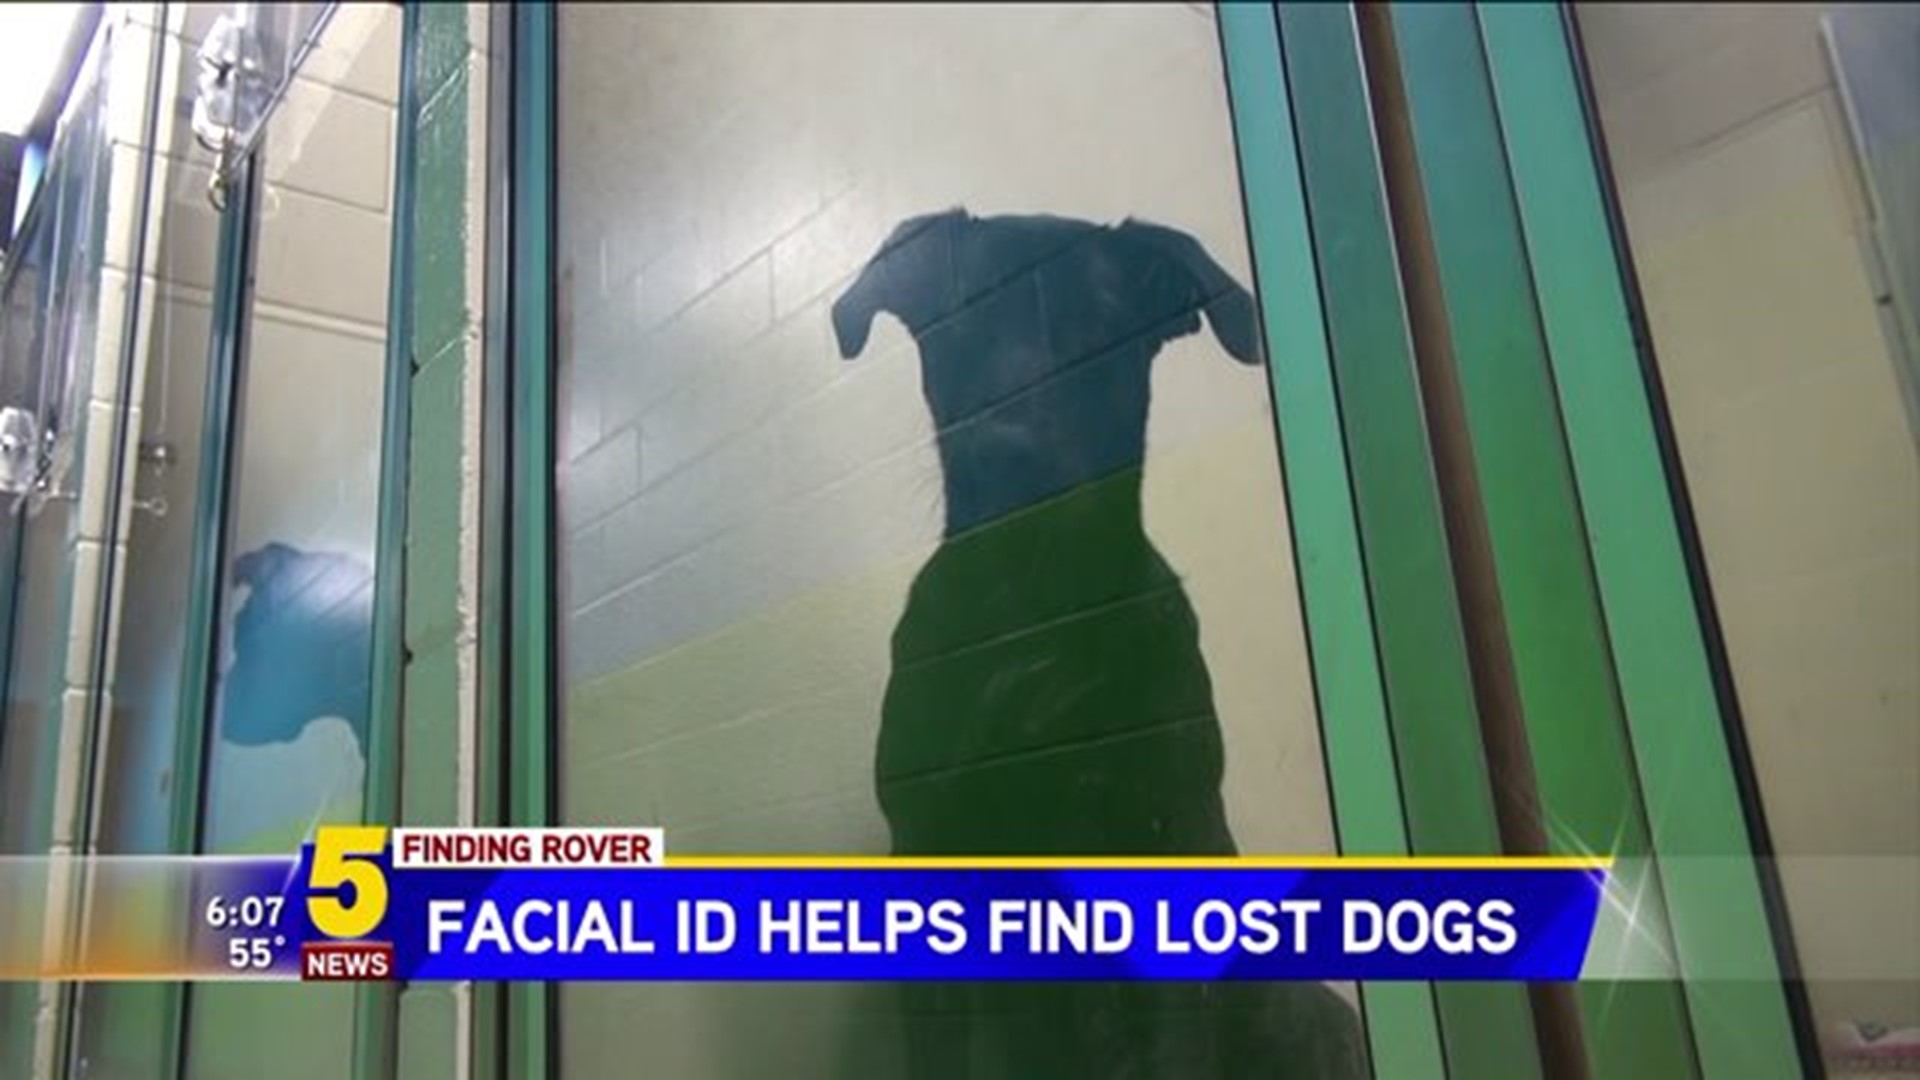 New App Helps Find Lost Dogs